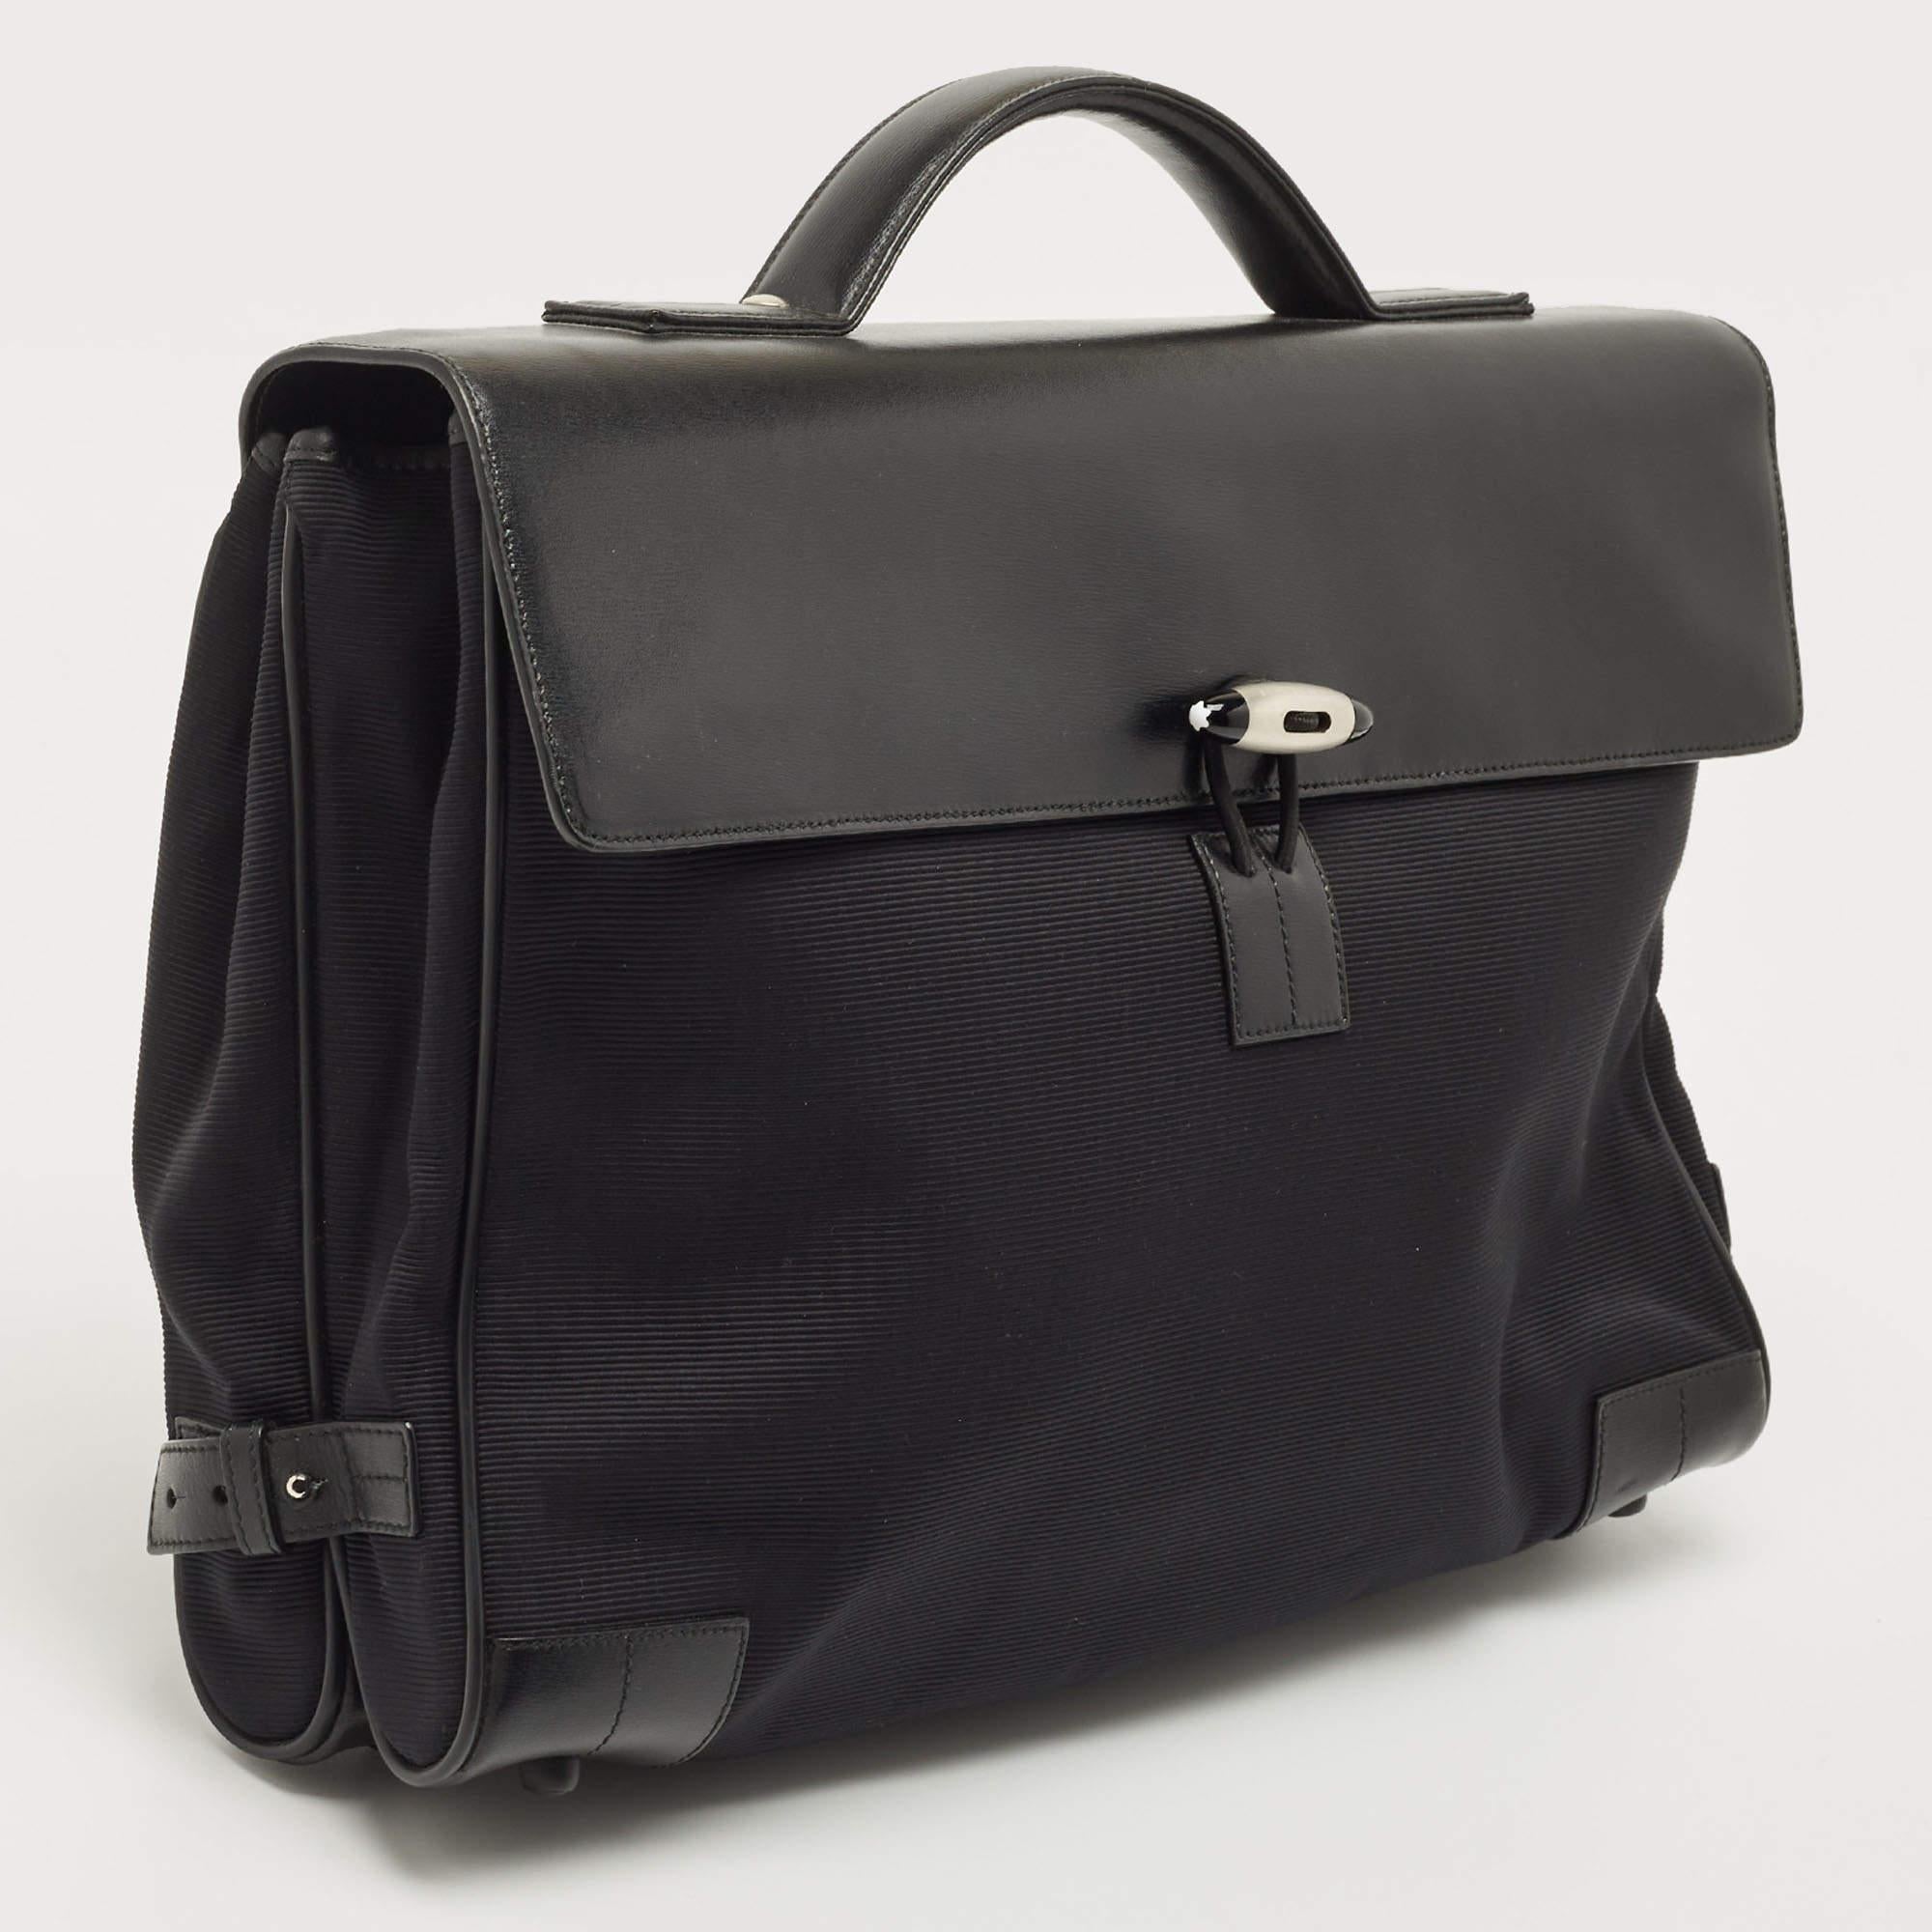 Perfect for housing your documents and other work essentials, this briefcase will make an elegant choice. Crafted with function in mind, this bag features a central capacious interior.

